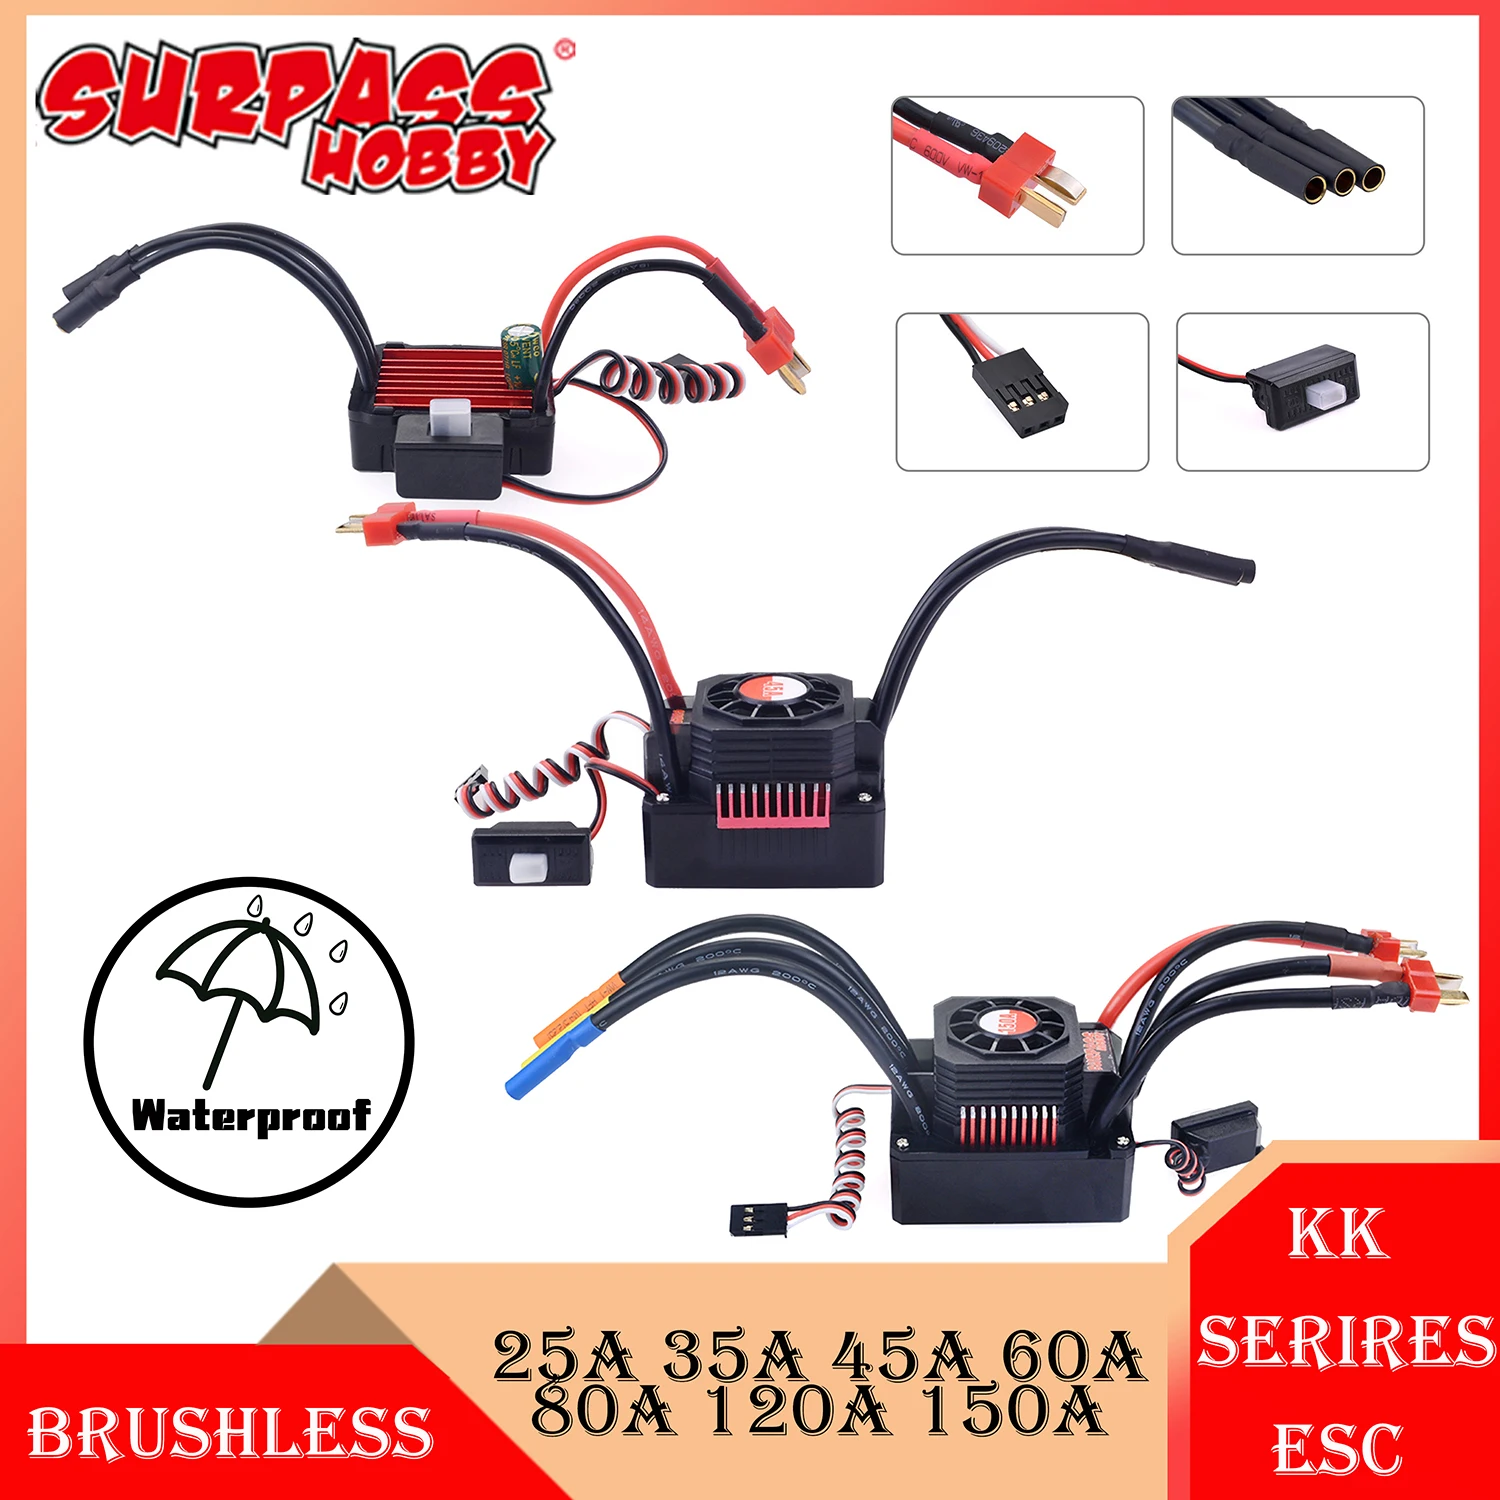 

SURPASS HOBBY Waterproof Brushless ESC 25A 35A 45A 60A 80A 120A 150A KK Serires for 1/8 1/10 1/12 1/20 RC Car Crawler Toy Motor